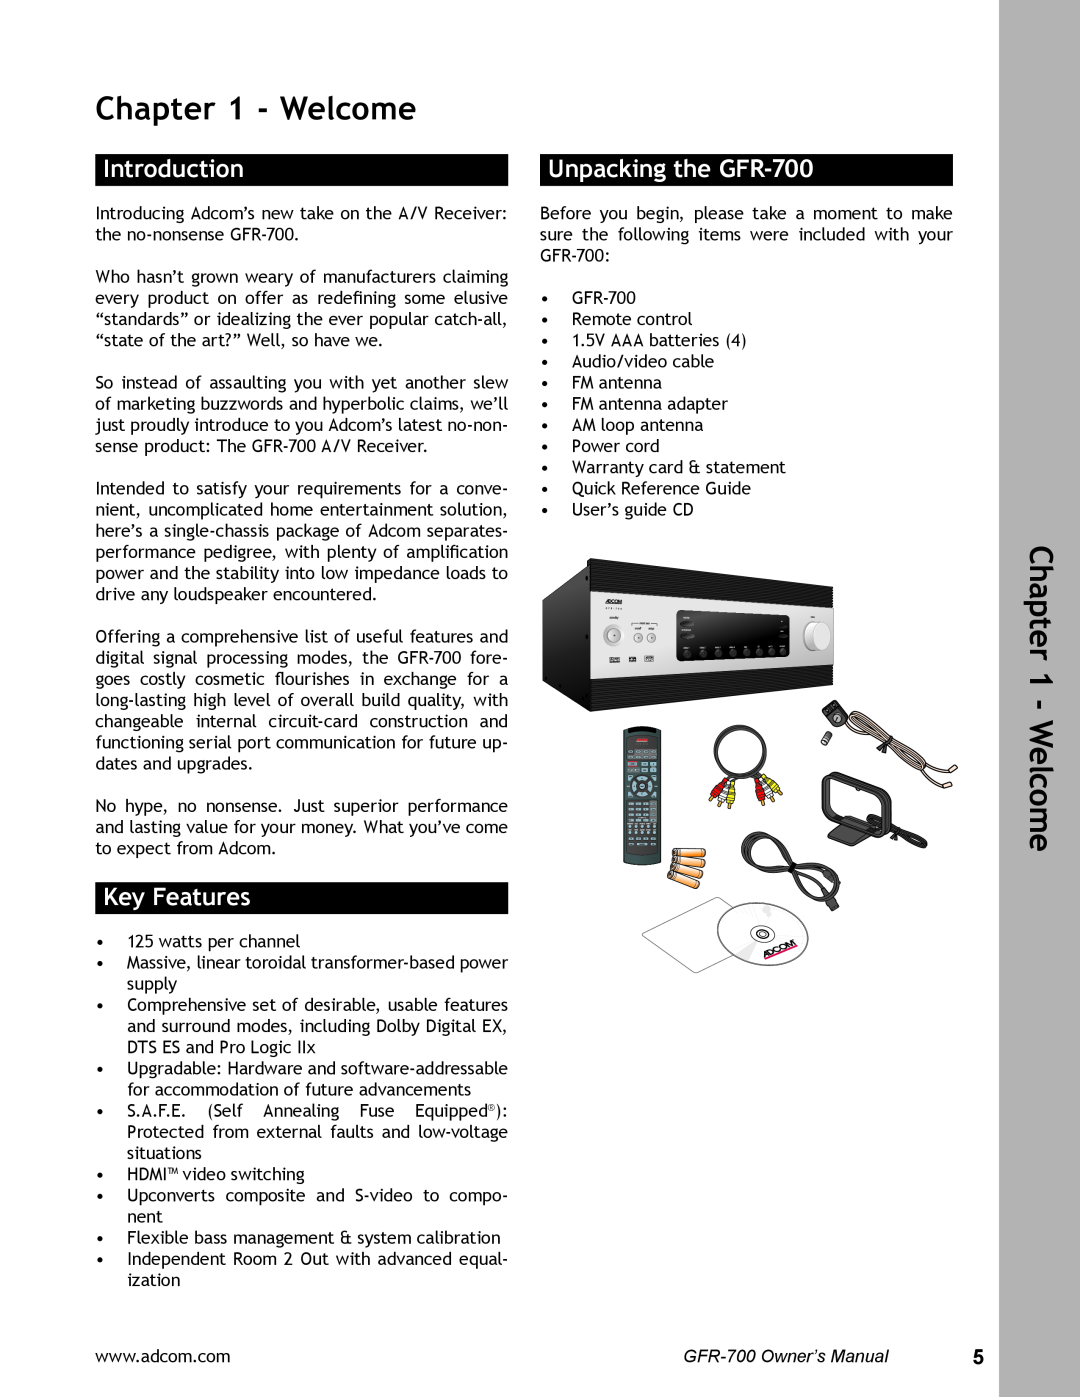 Adcom user manual Introduction, Key Features, Unpacking the GFR-700, Welcome 